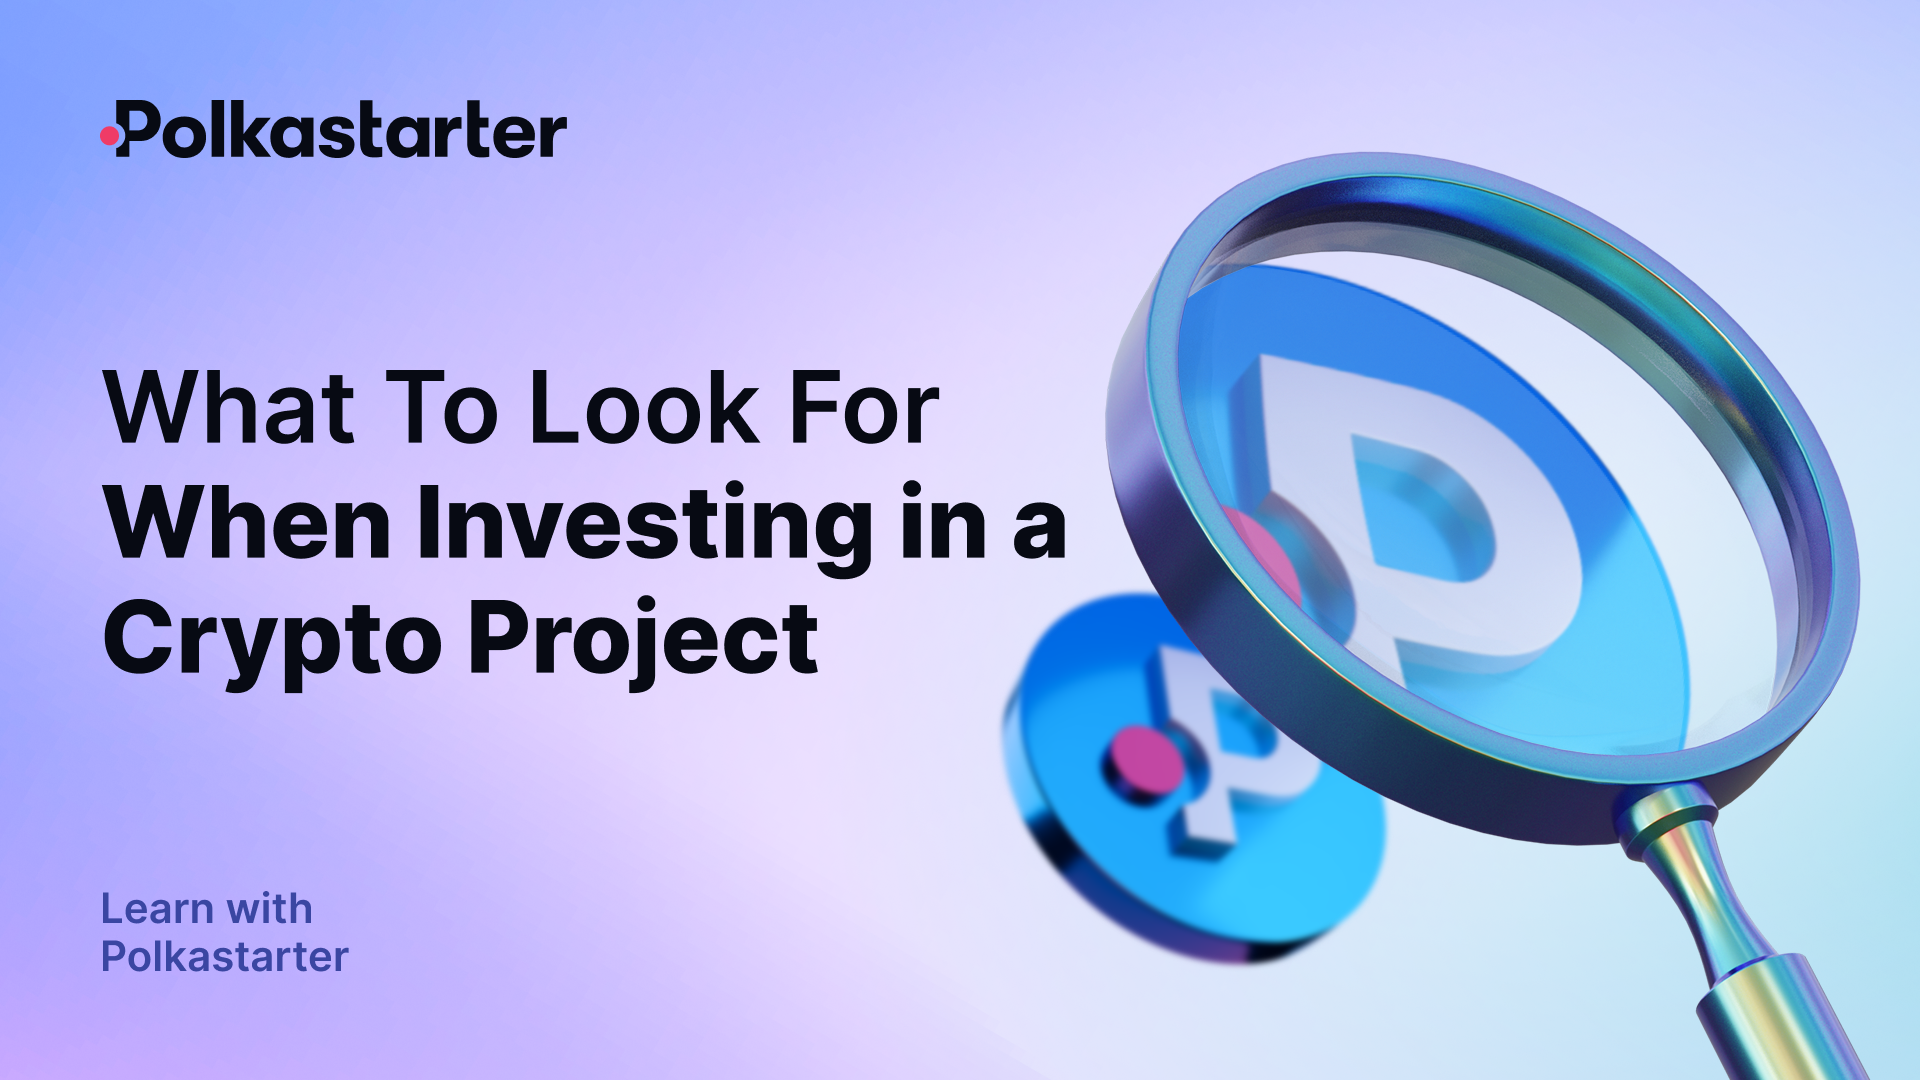 What To Look For When Investing in a Crypto Project